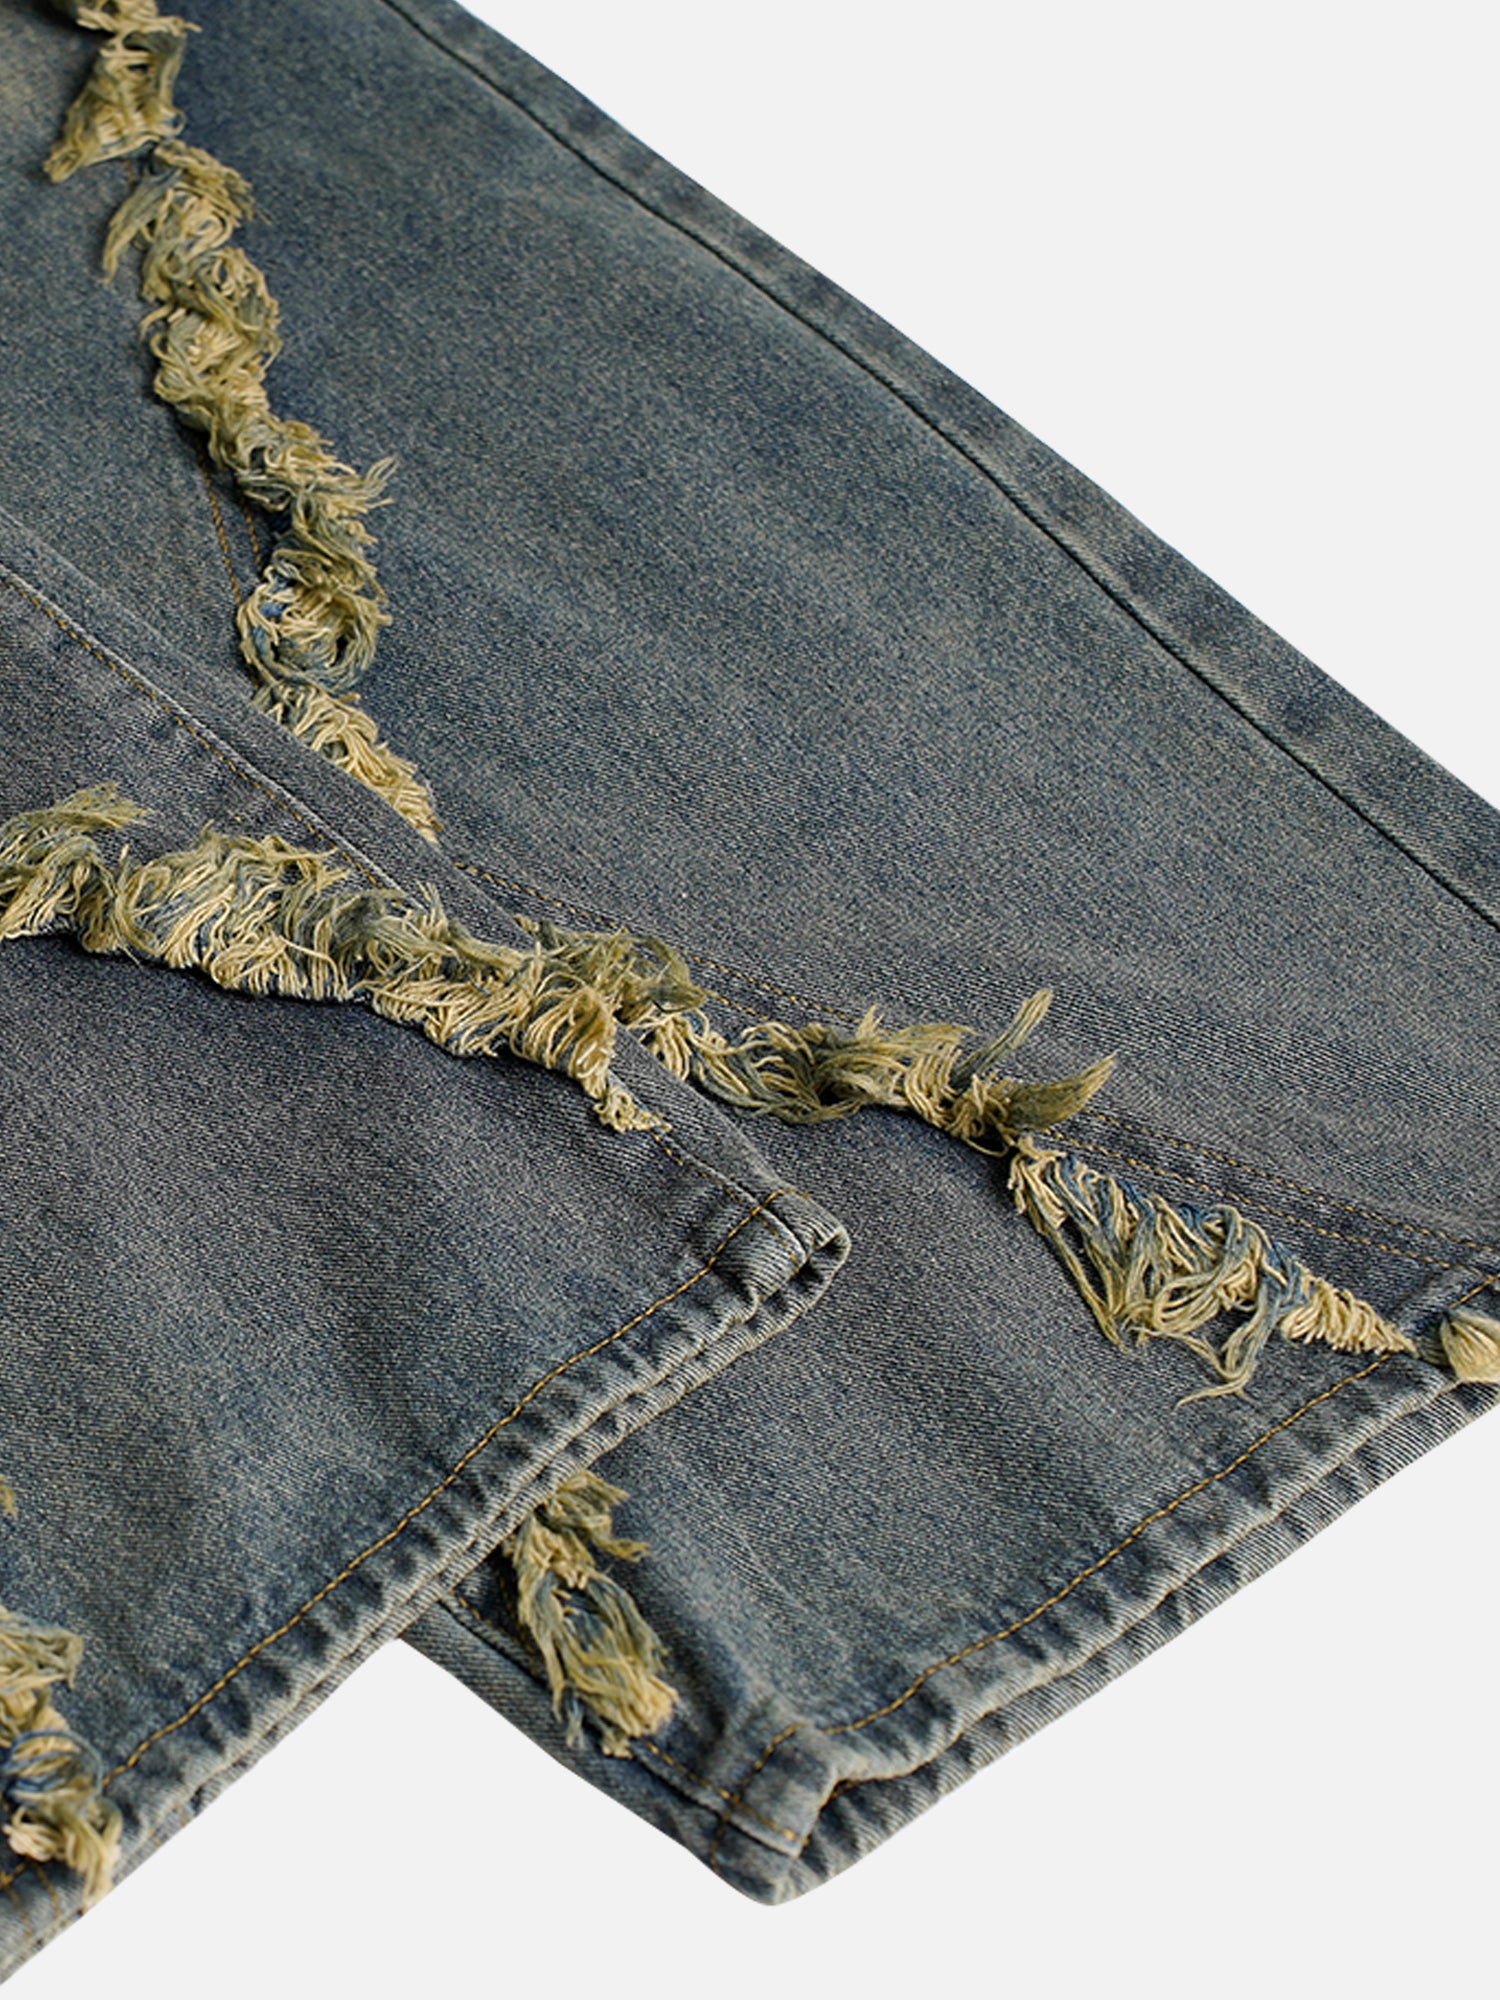 Thesupermade High Street Hip Hop Washed Distressed Jeans - 2069